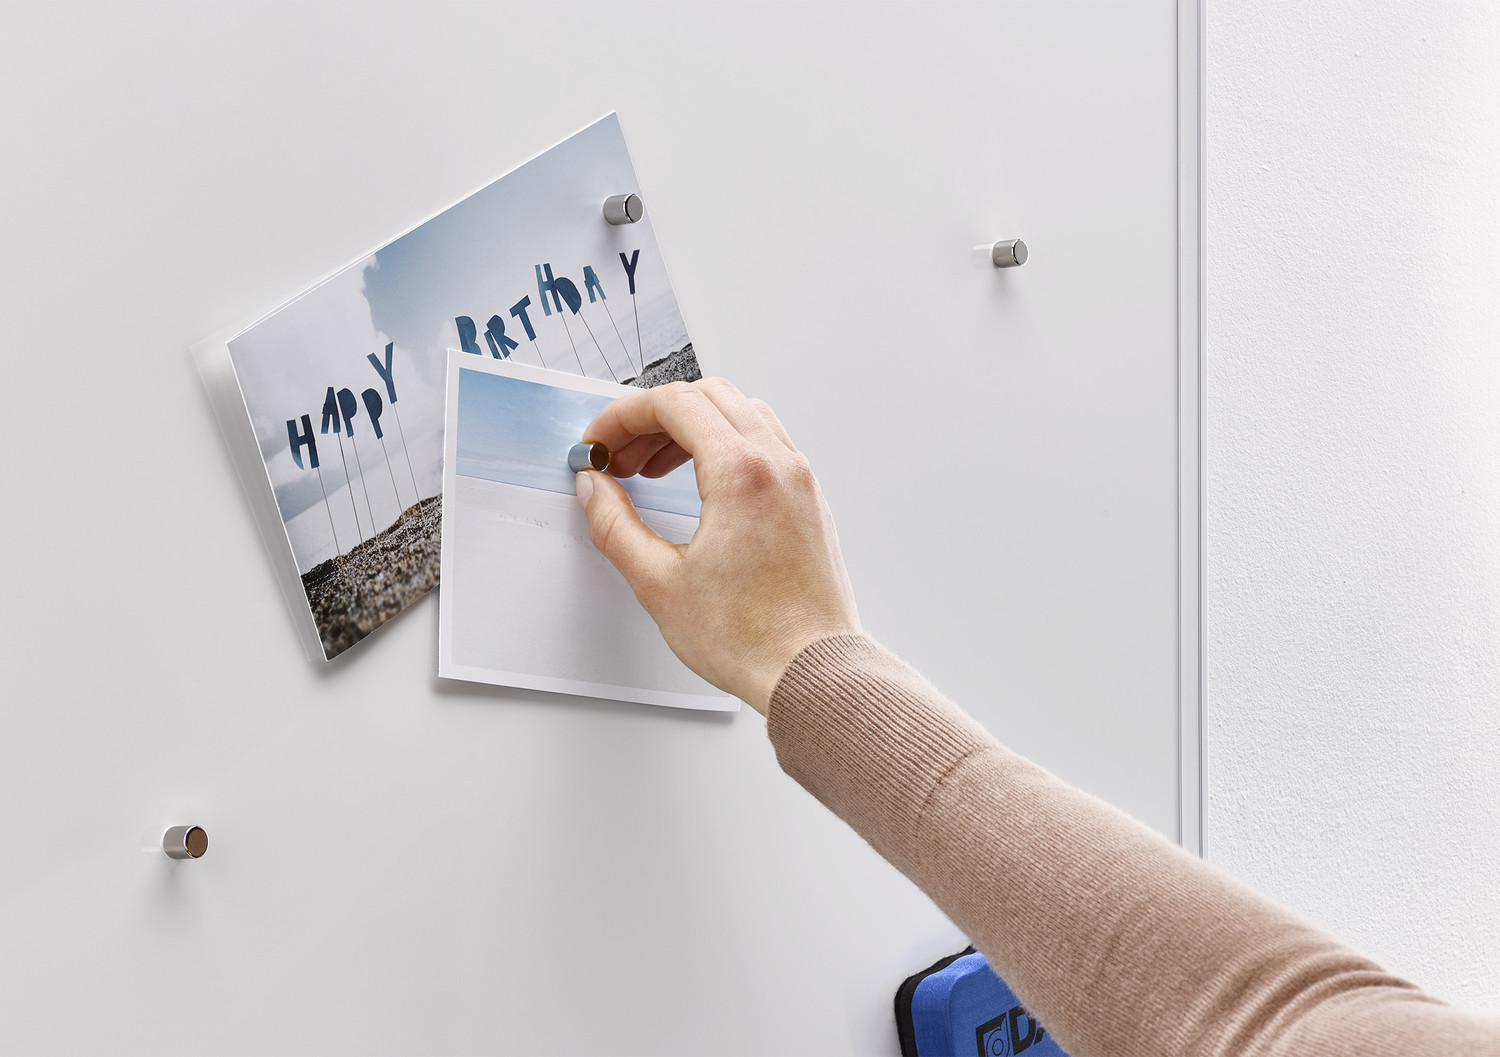 DAHLE Megadym magnets offer especially high adhesive strength and securely hold documents, plans or photos, even on glass boards.